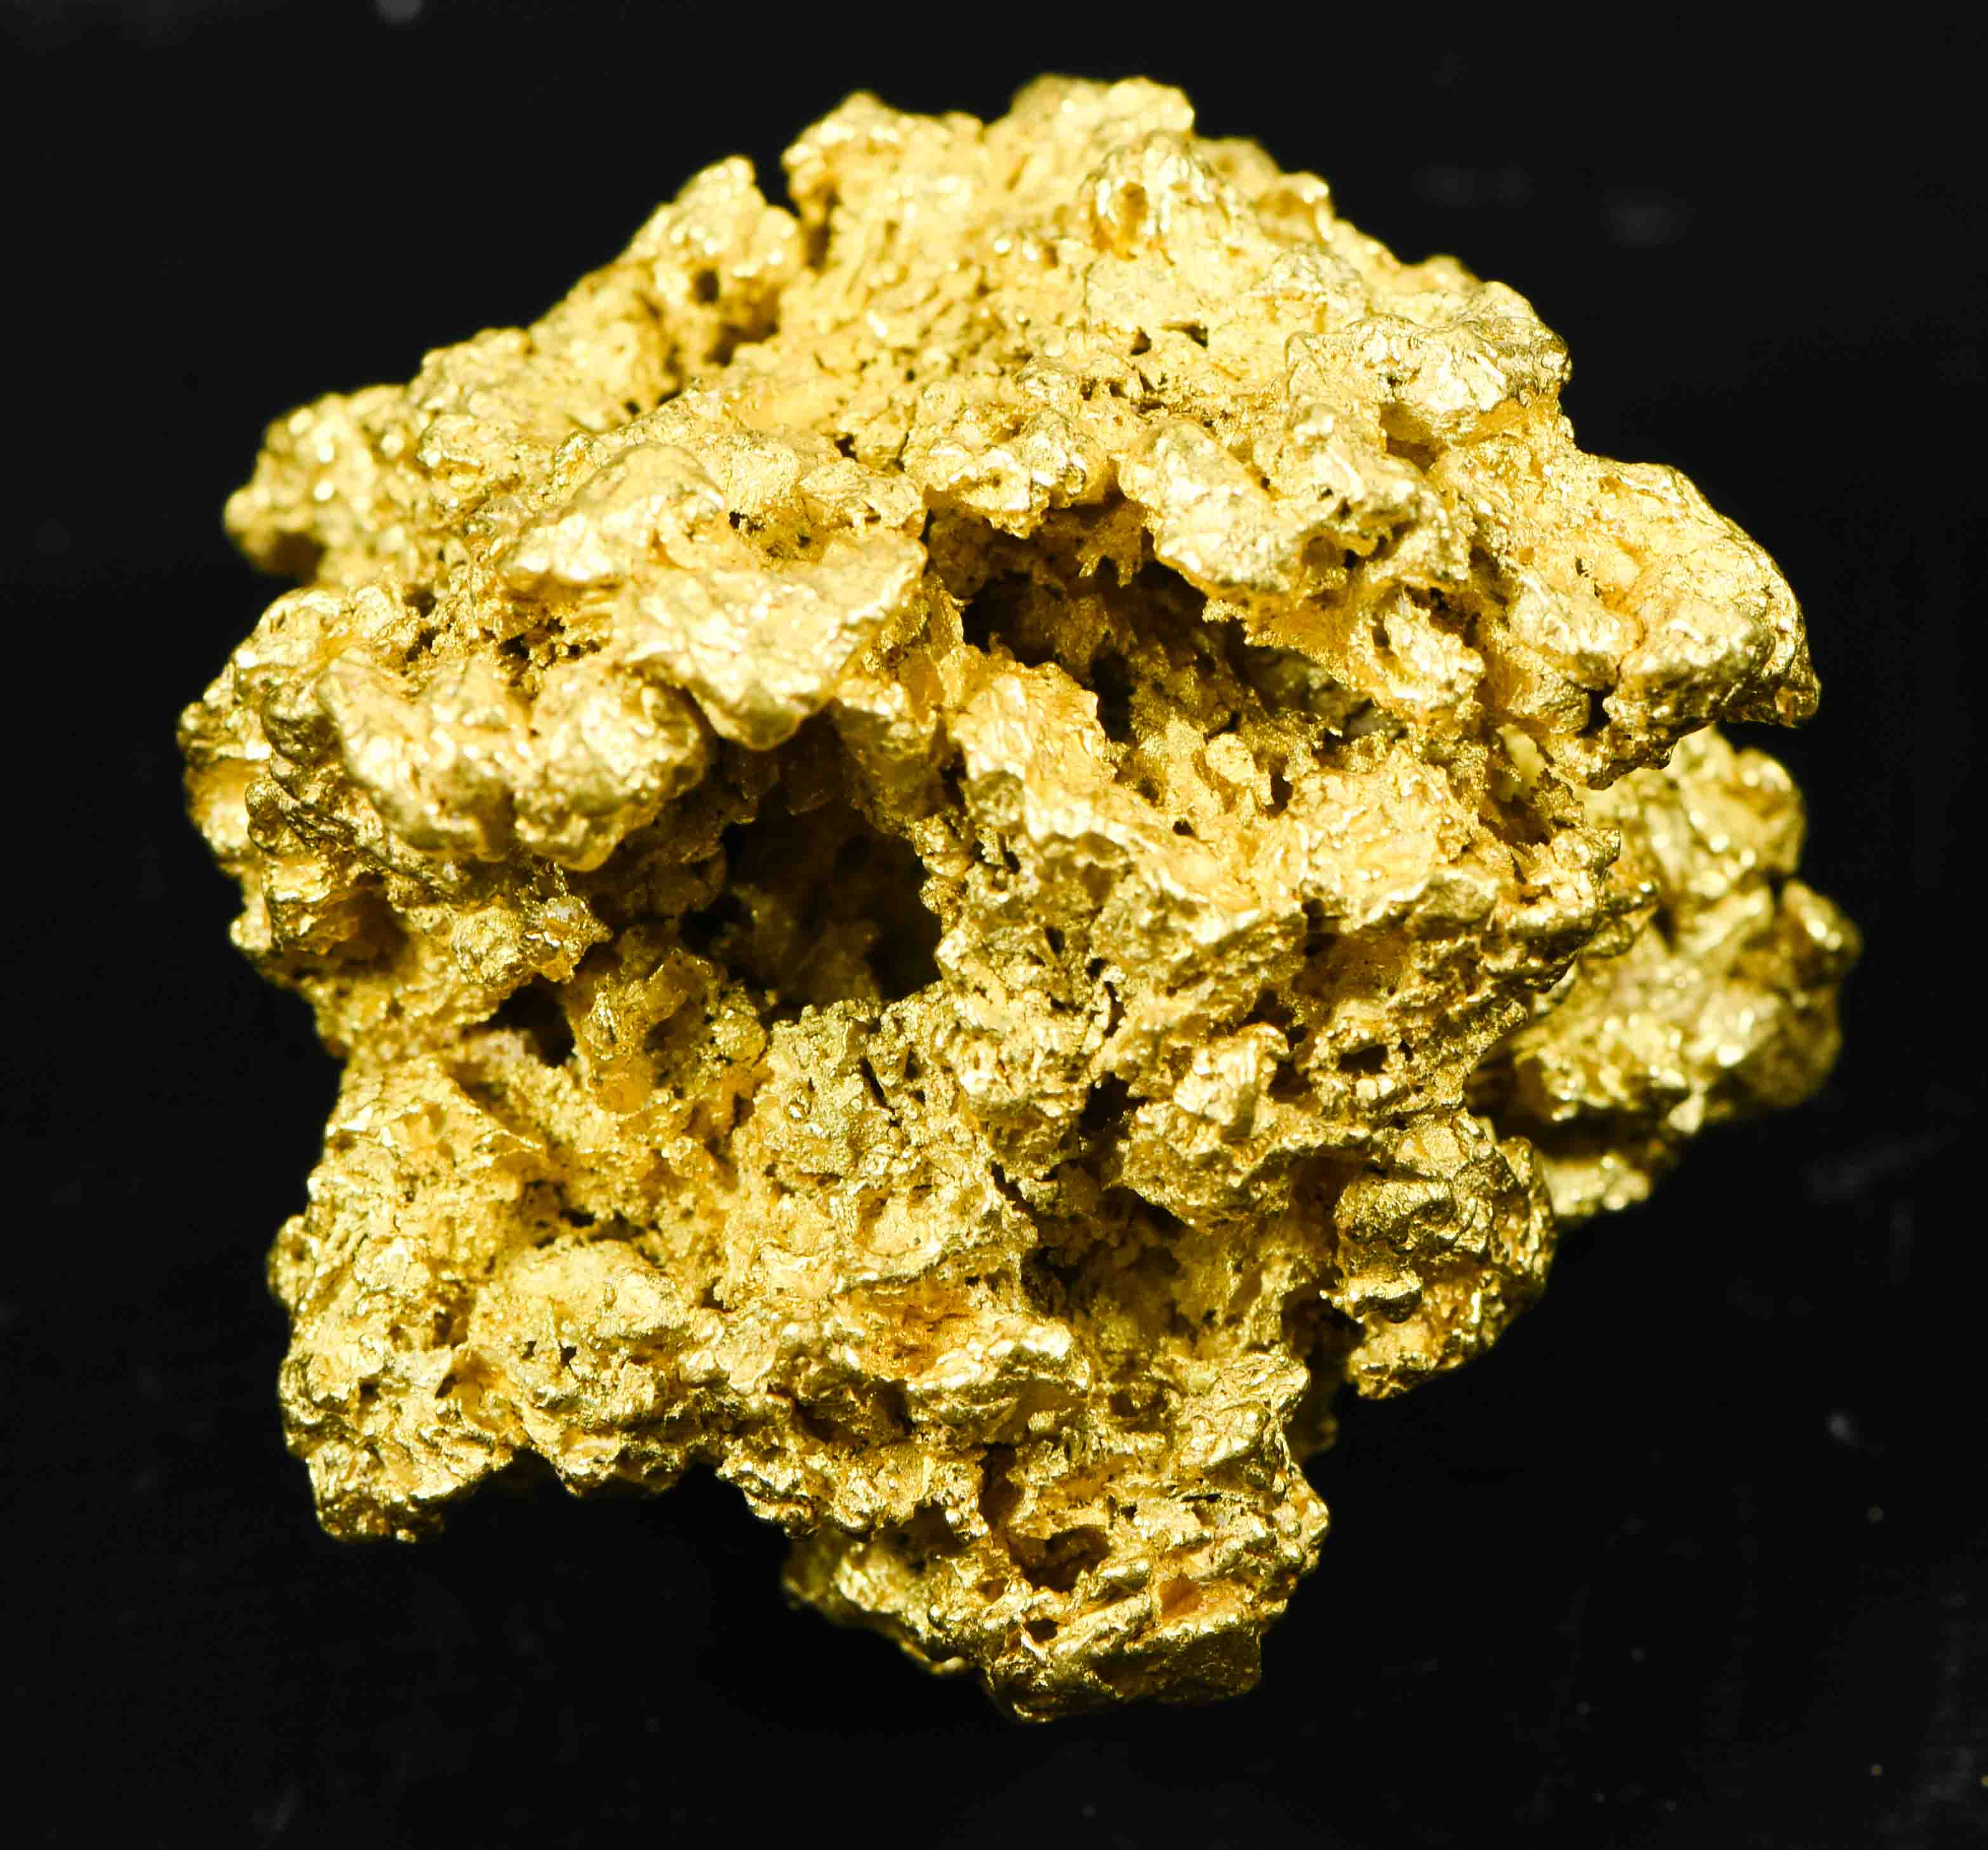 S Shaped Natural Australian Gold Nugget - 4.19 grams [RB757] - $344.00 :  Natural gold Nuggets For Sale - Buy Gold Nuggets and Specimens, The finest  jewelry/investment grade gold nuggets from around the world